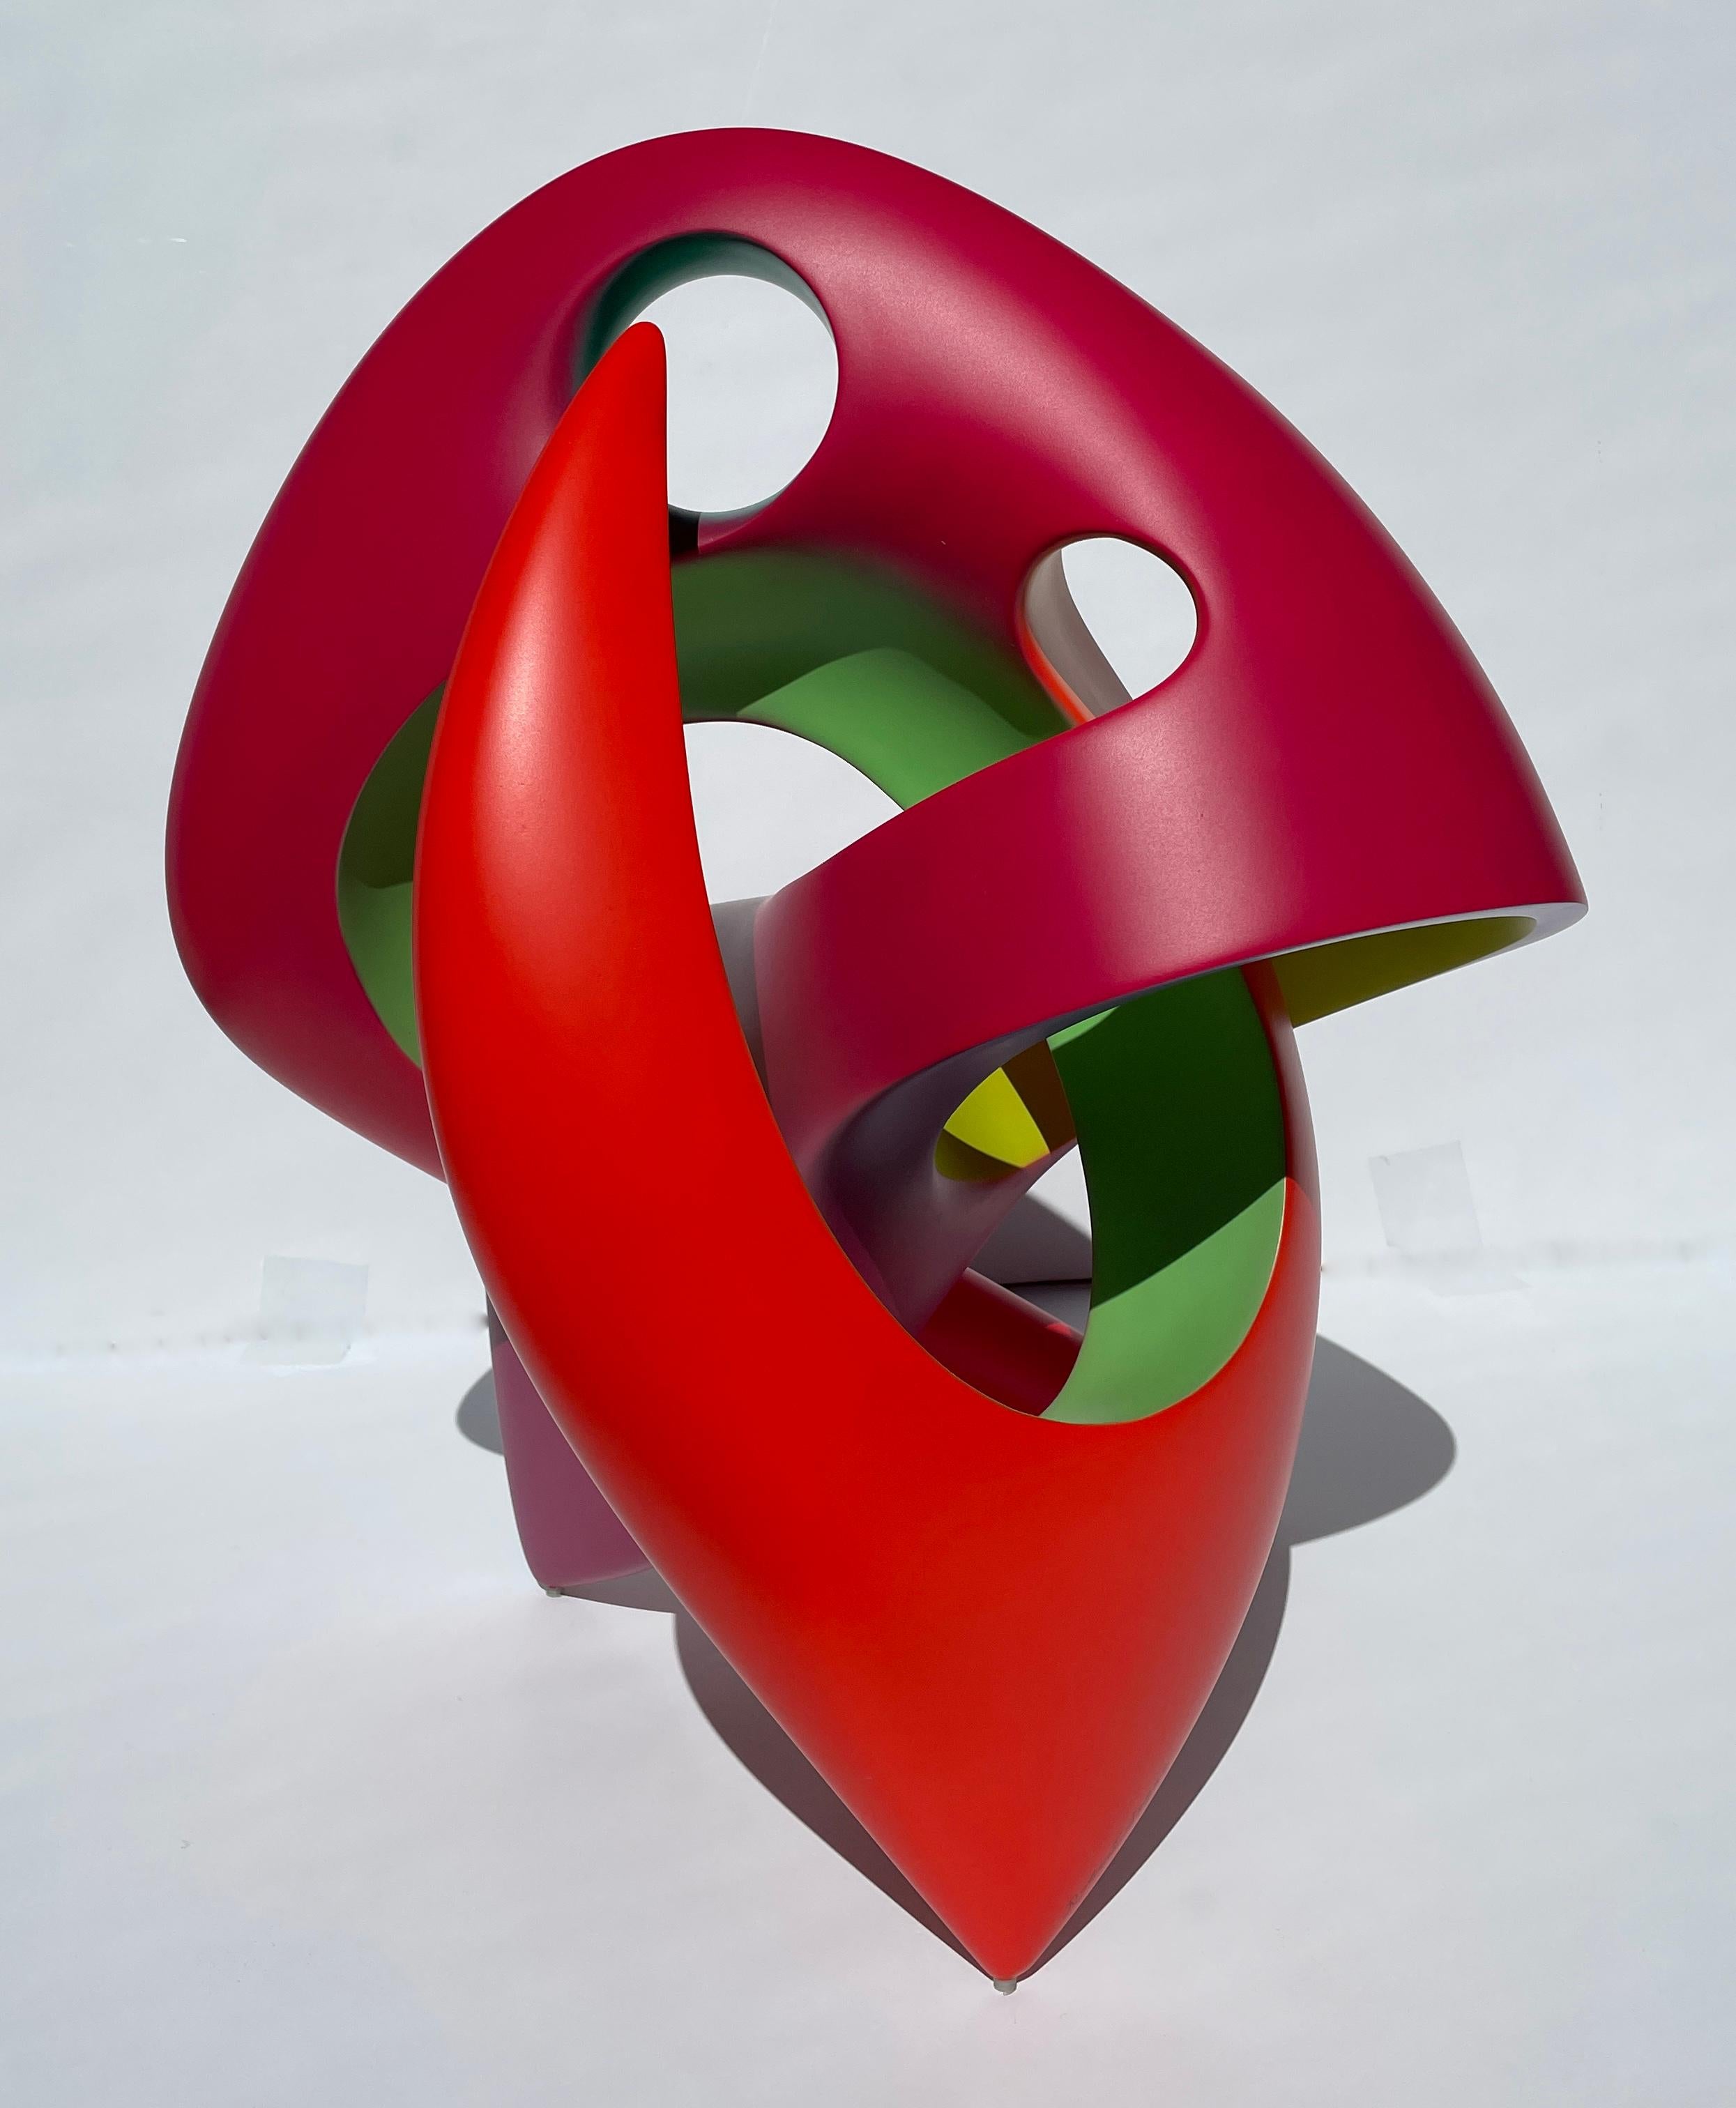 Robert Segal’s abstract sculpture offers a particularly fertile ground for experiments in shape, color, proportion, and technique. He steps away from non-traditional sculpting methods by using industrial manufacturing techniques – welding and mold